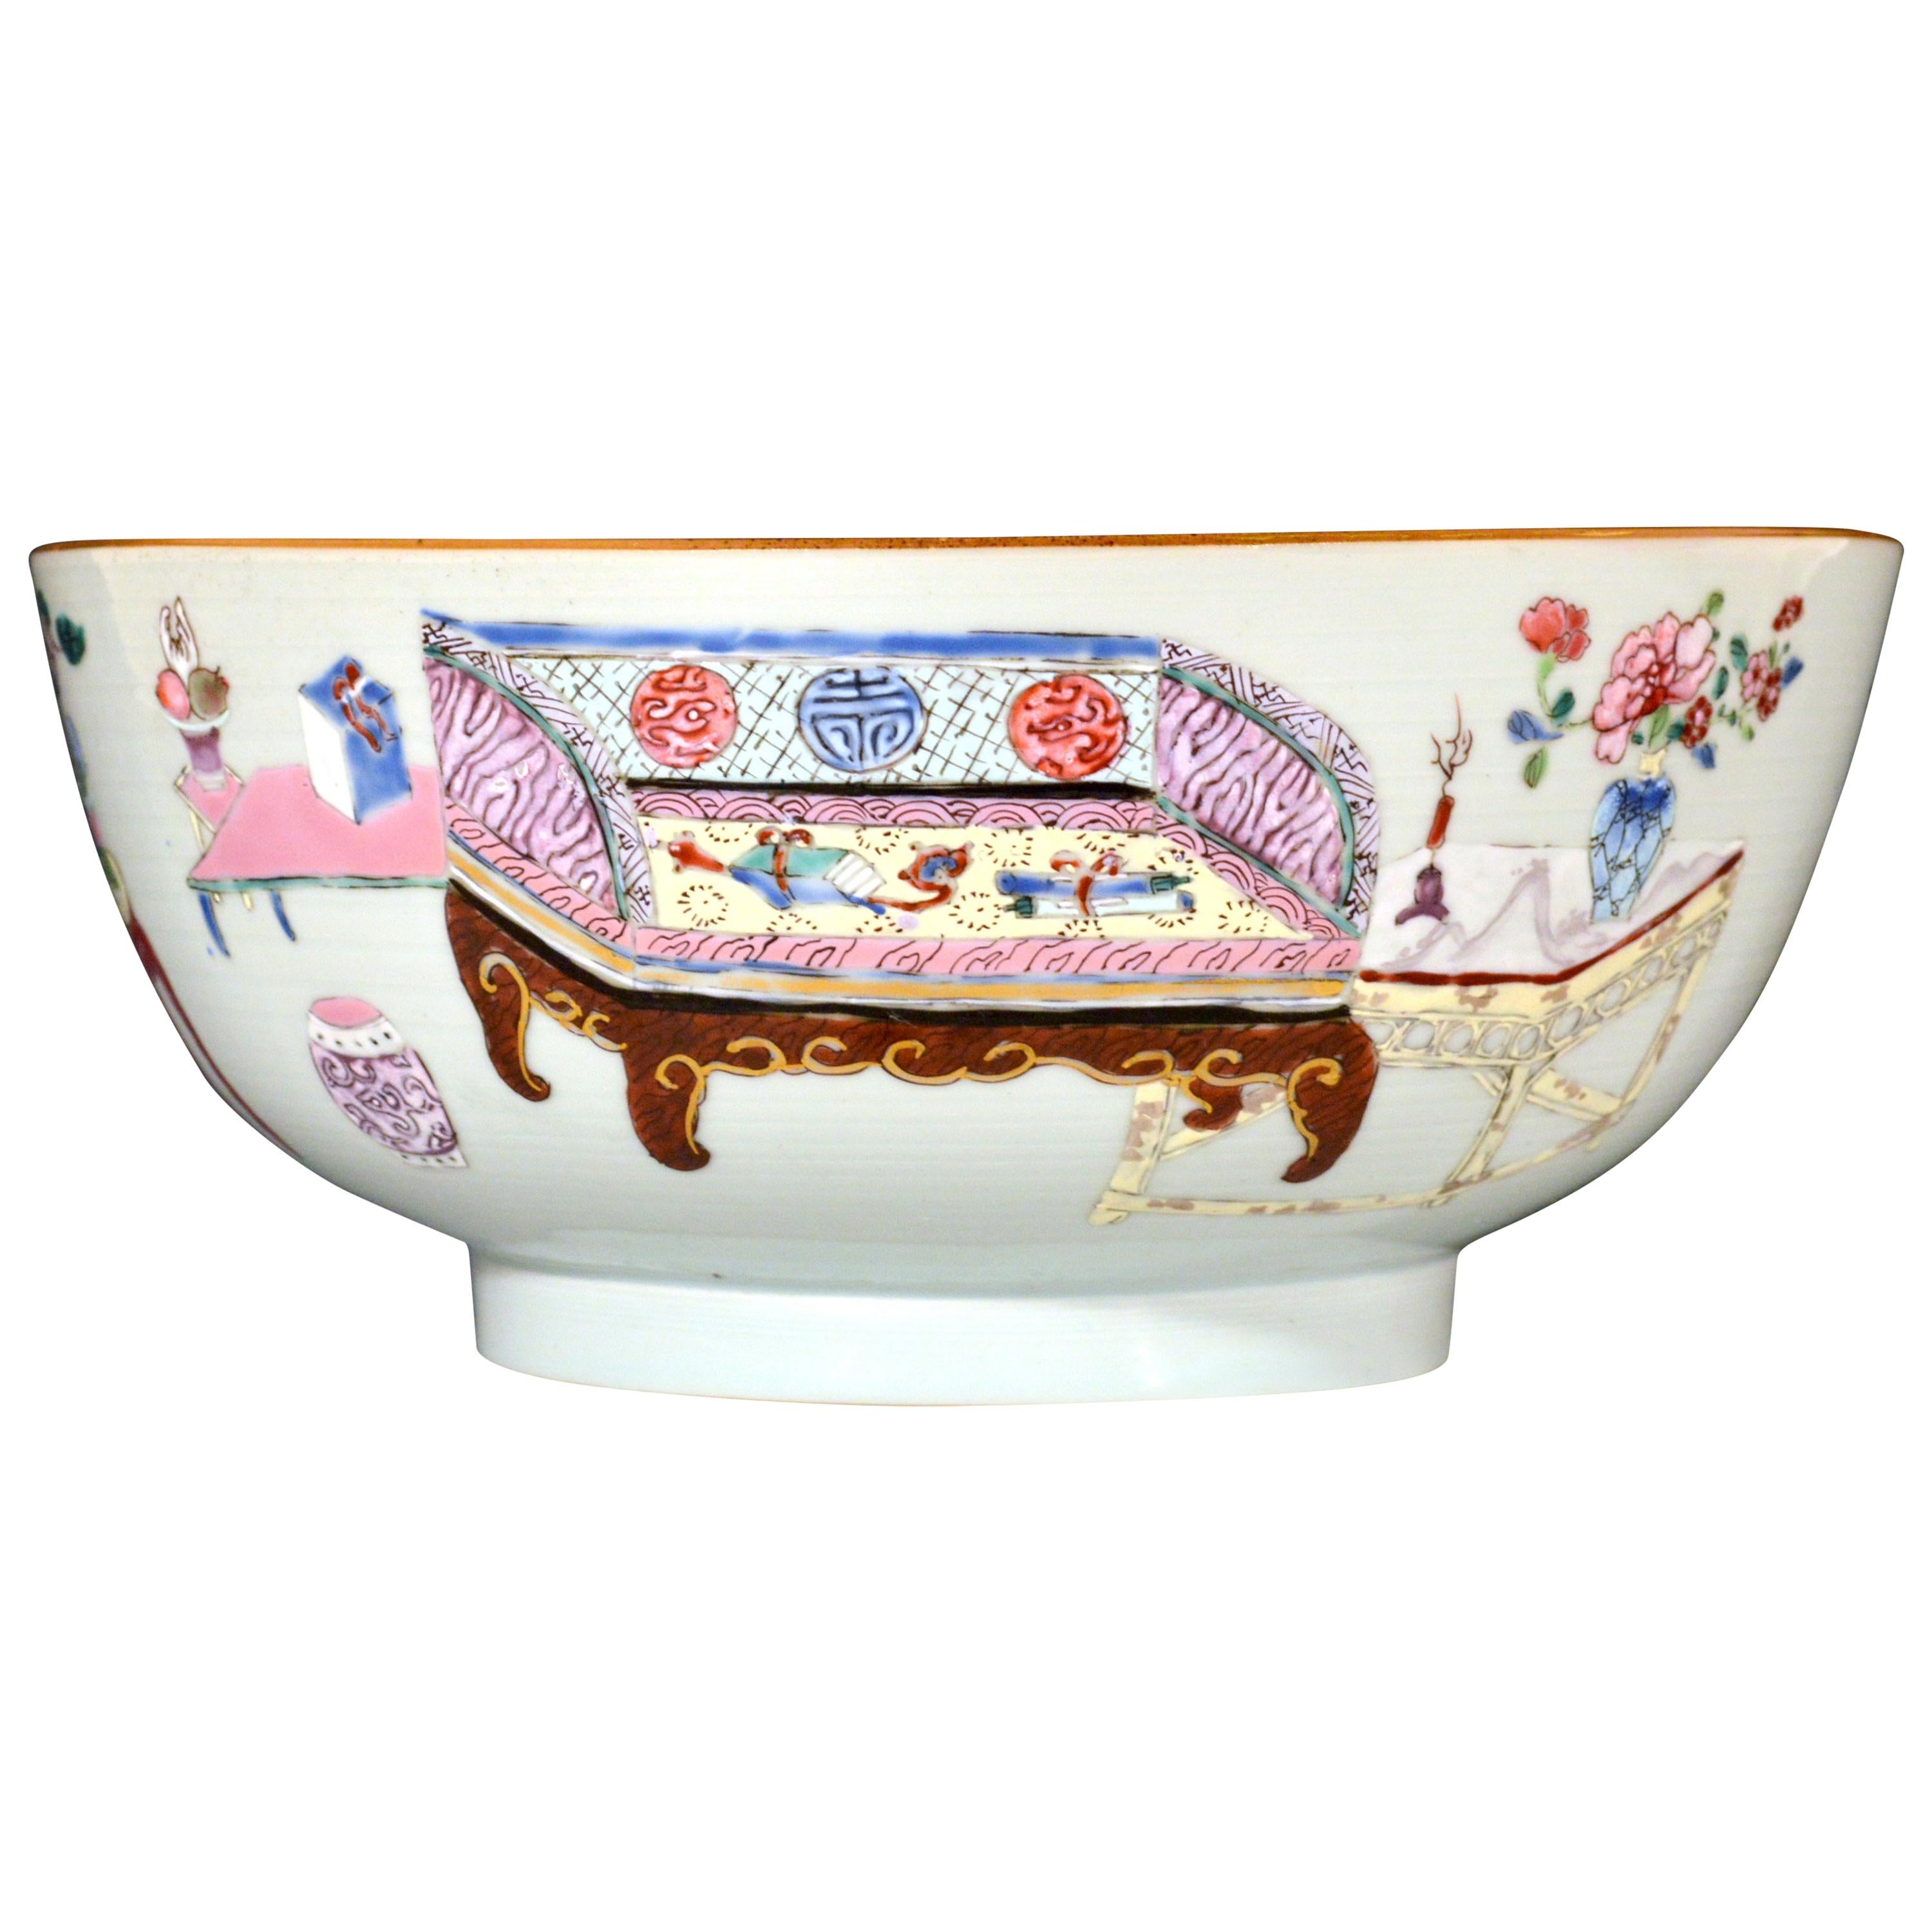 18th Century Chinese Export Porcelain Bowl with Chinese Domestic Furniture